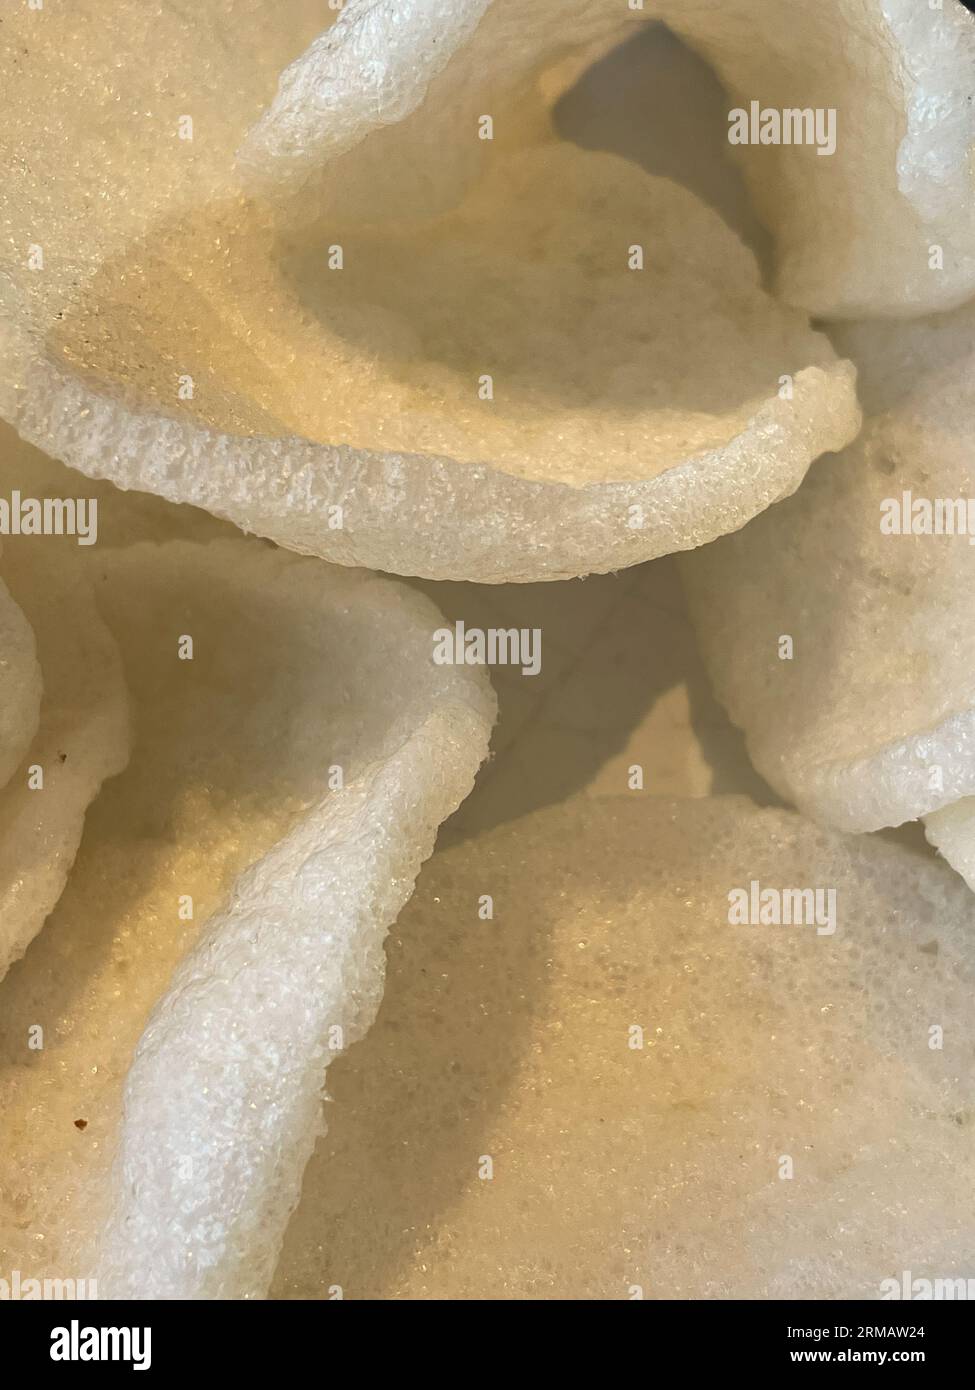 Kerupuk Udang or Prawn crackers are made from tapioca flour and finely ground shrimp mixed with herbs and flavor enhancers. Stock Photo